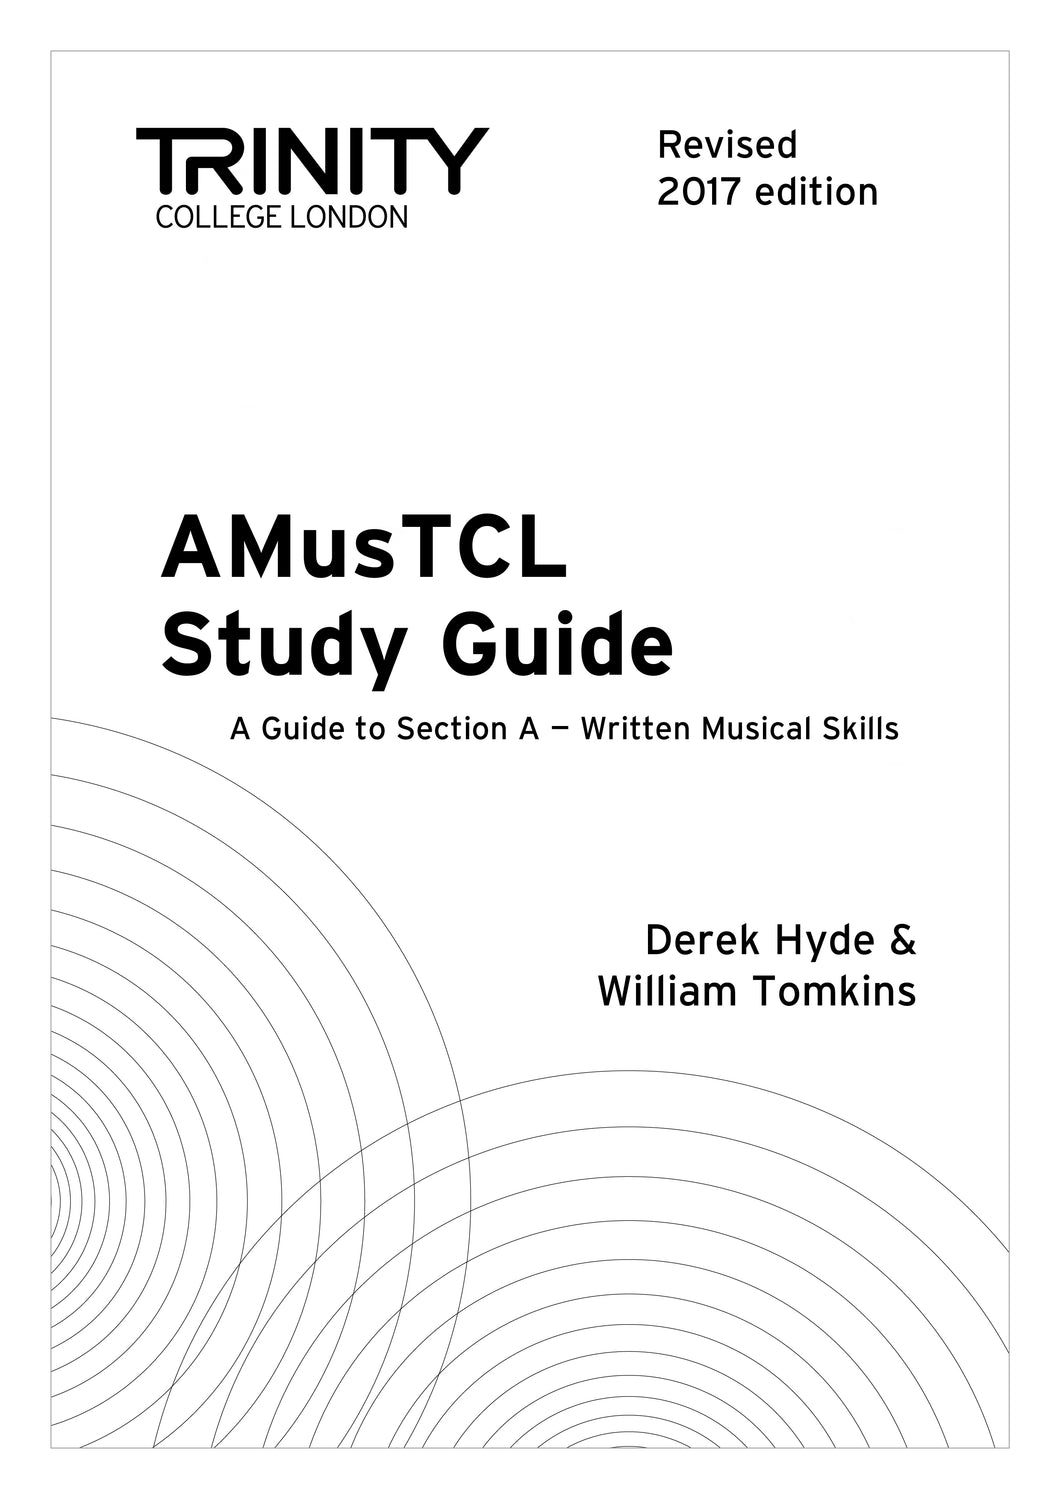 AMusTCL Study Guide Revised 2017